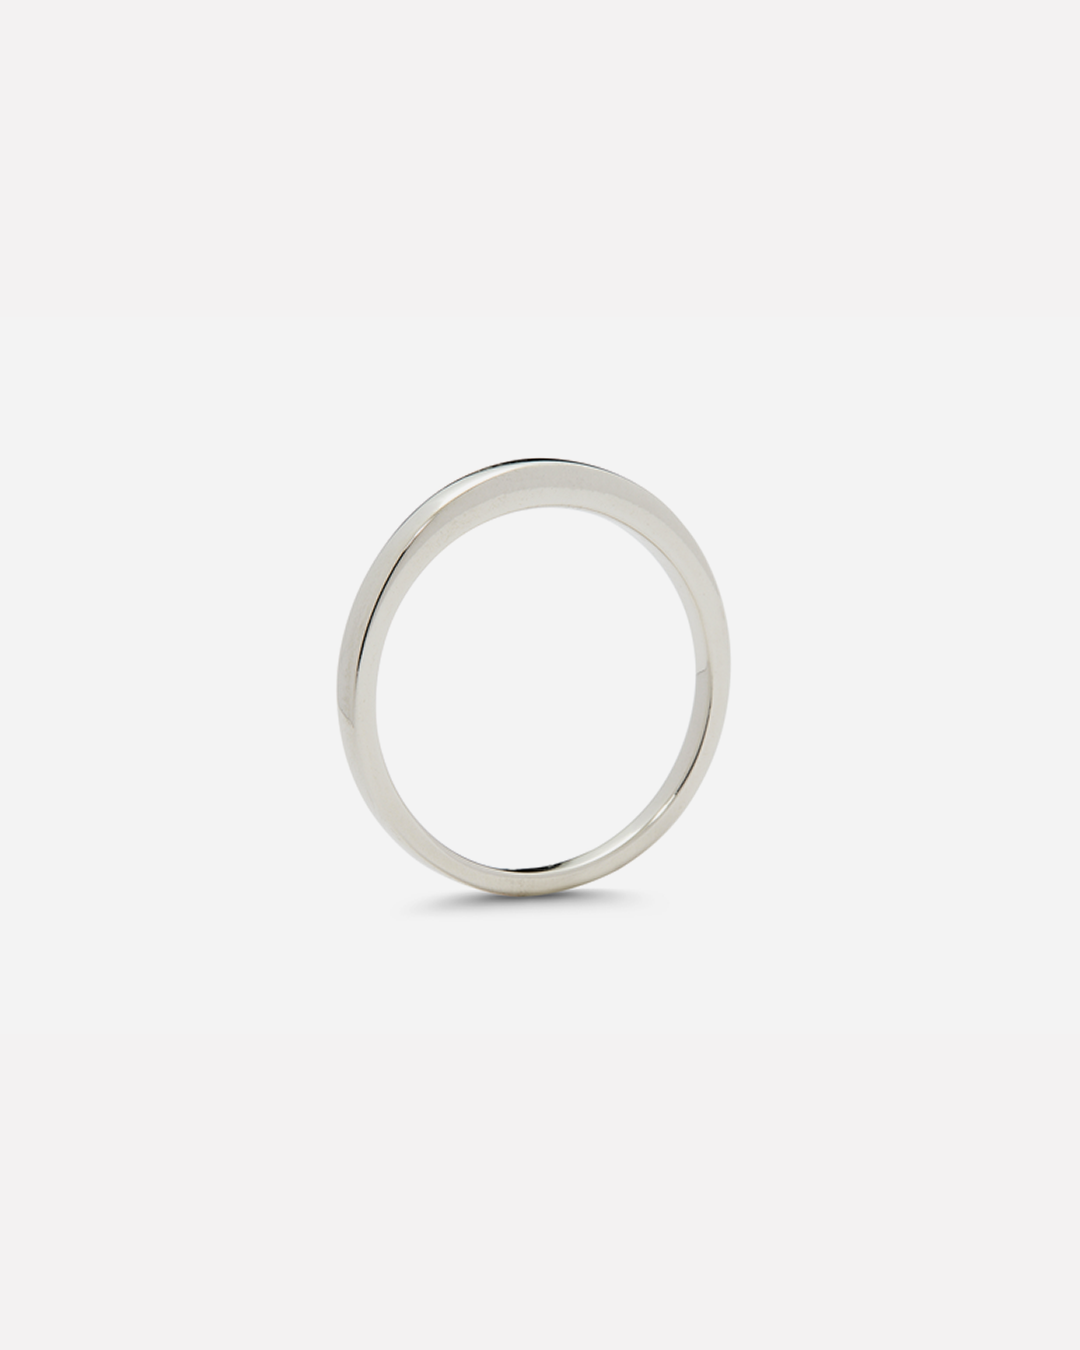 Orbit Band / Narrow By Hiroyo in Wedding Bands Category